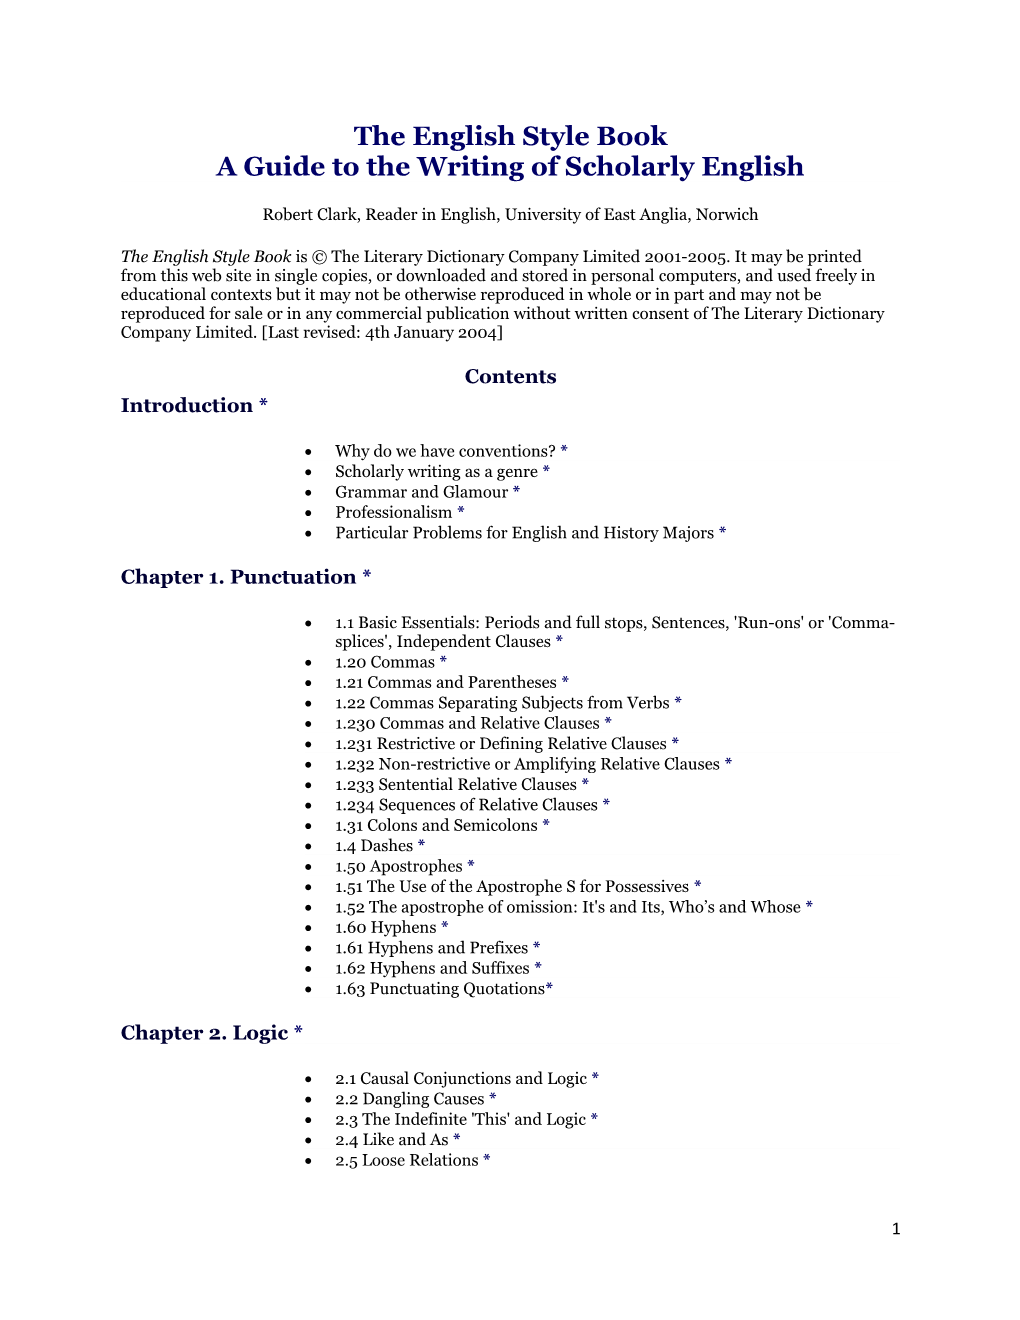 The English Style Book a Guide to the Writing of Scholarly English